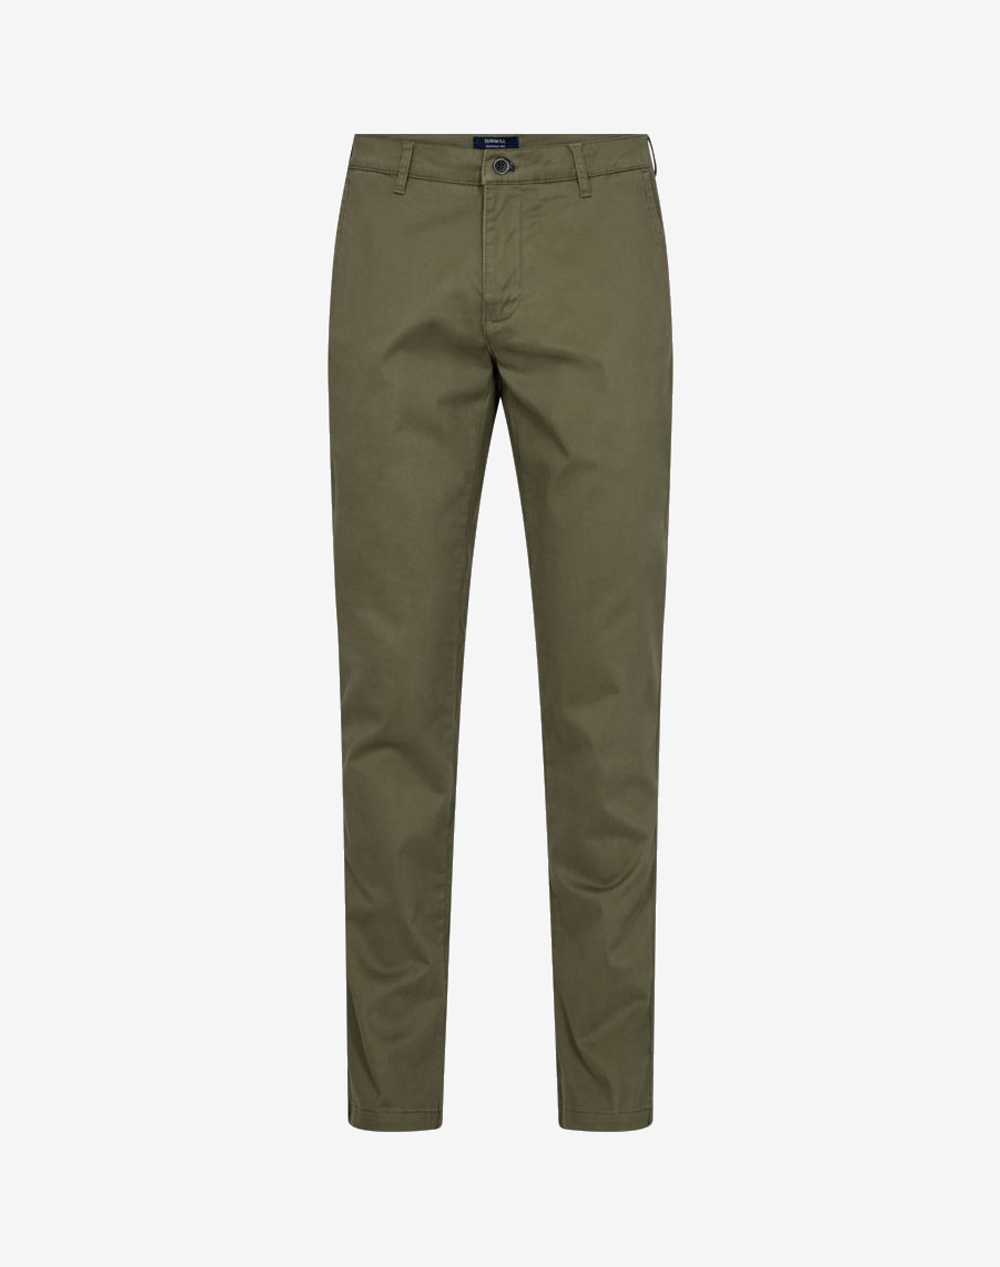 SUNWILL CHINO EXRTREME FLEXIBILITY TROUSERS 425127-8350-245 Olive 3820ASUNW2000009_XR29847